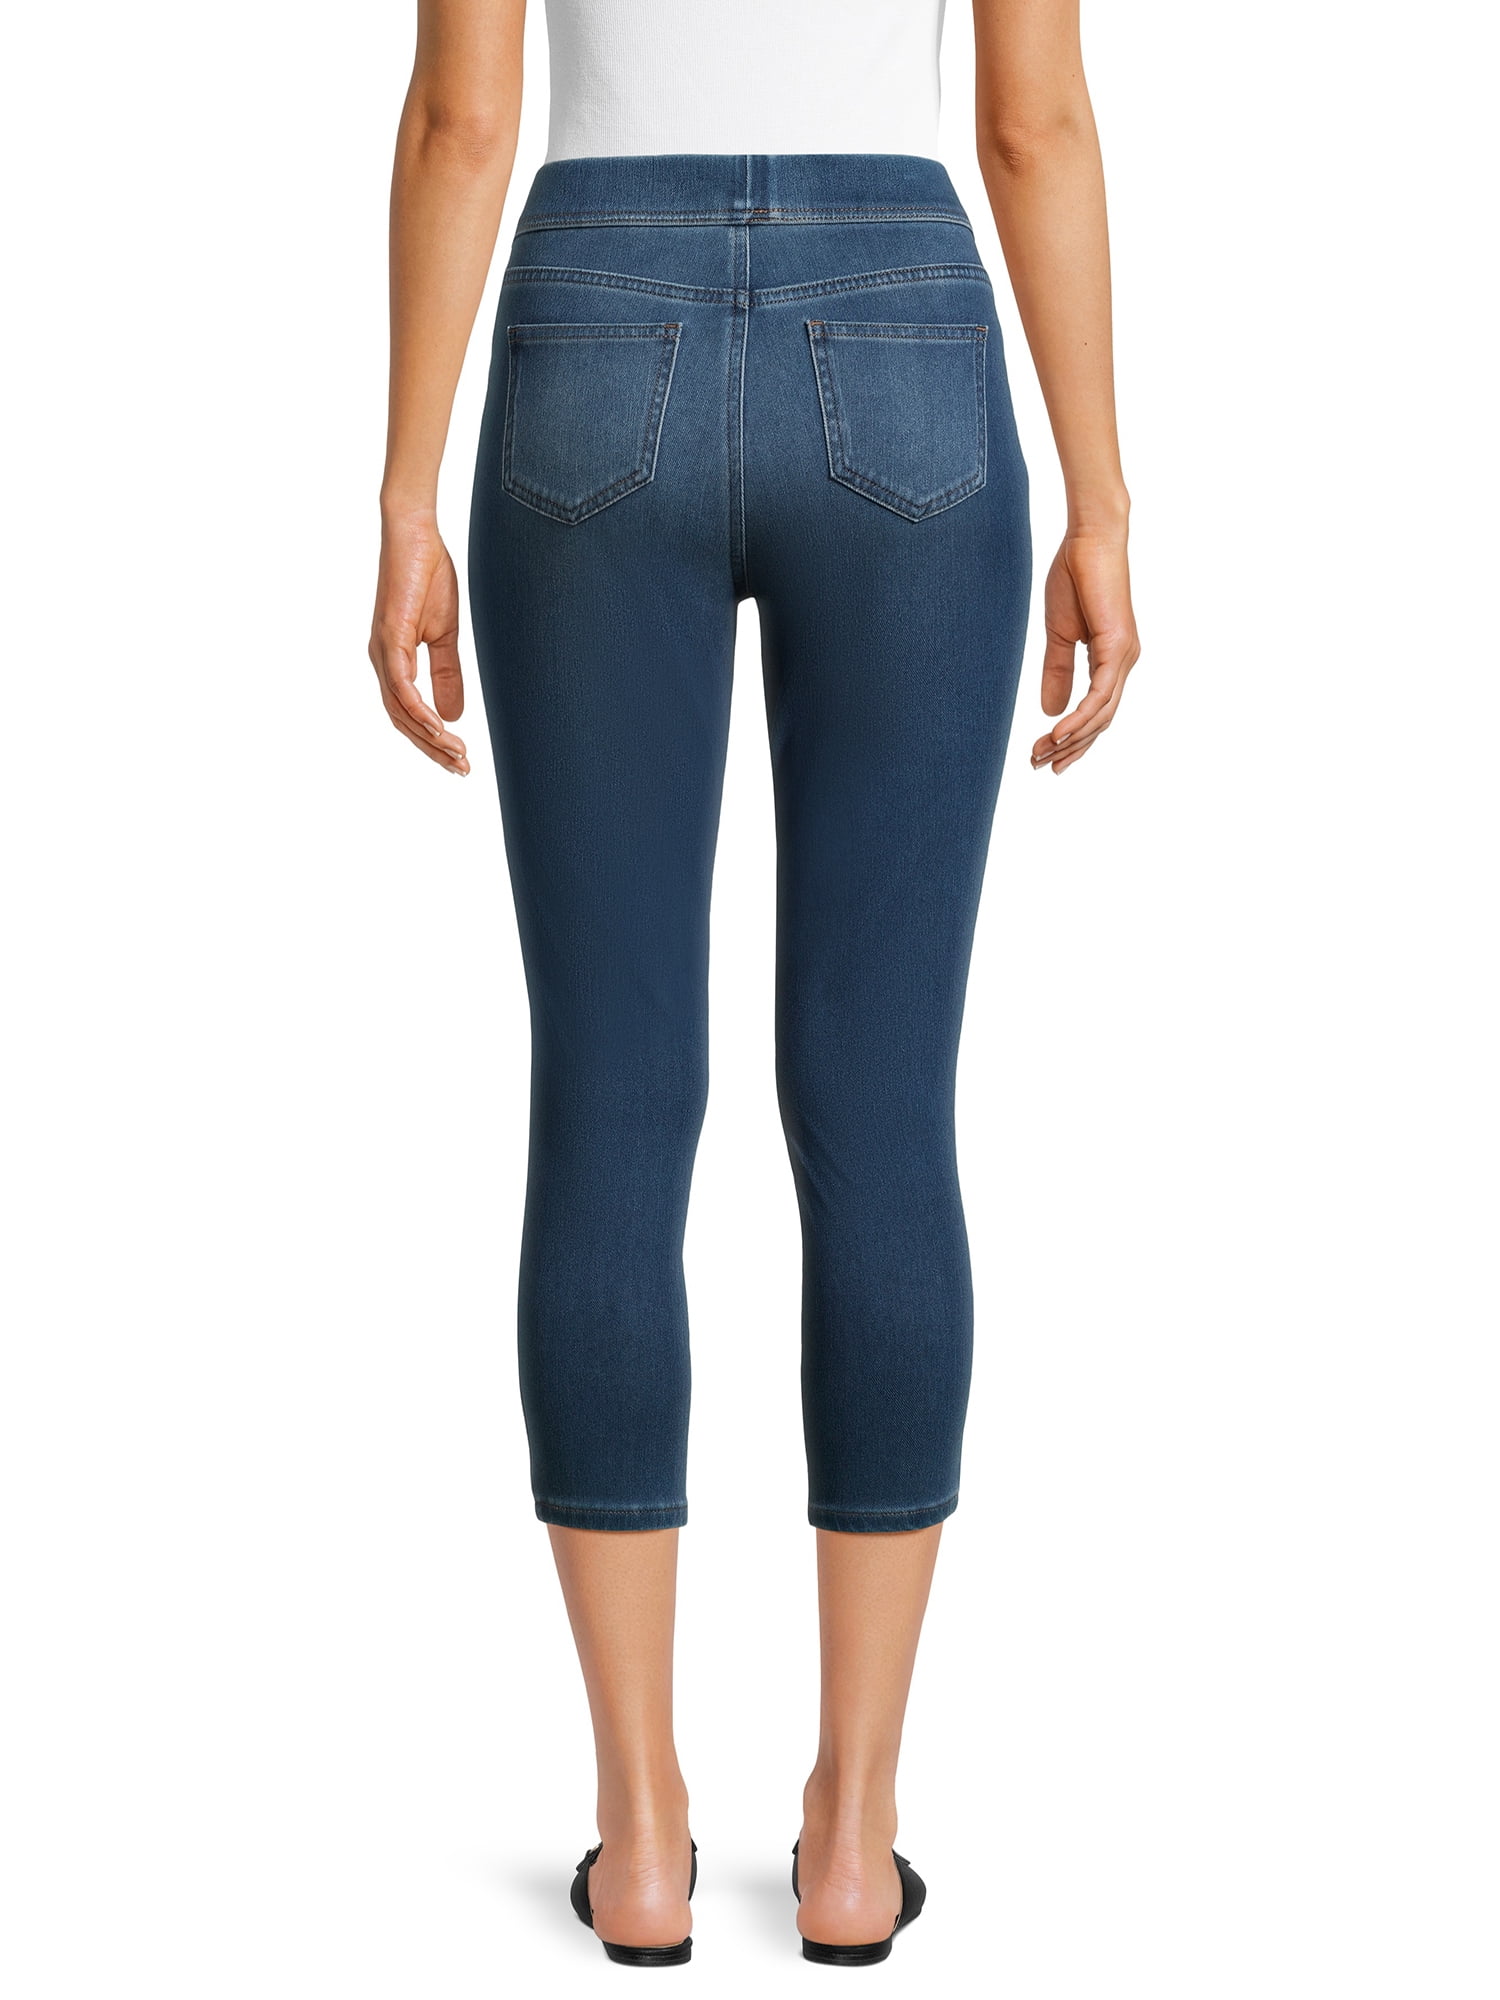 Tangboots Capri Jeans for Women Stretch High Waisted Jeggings Pull